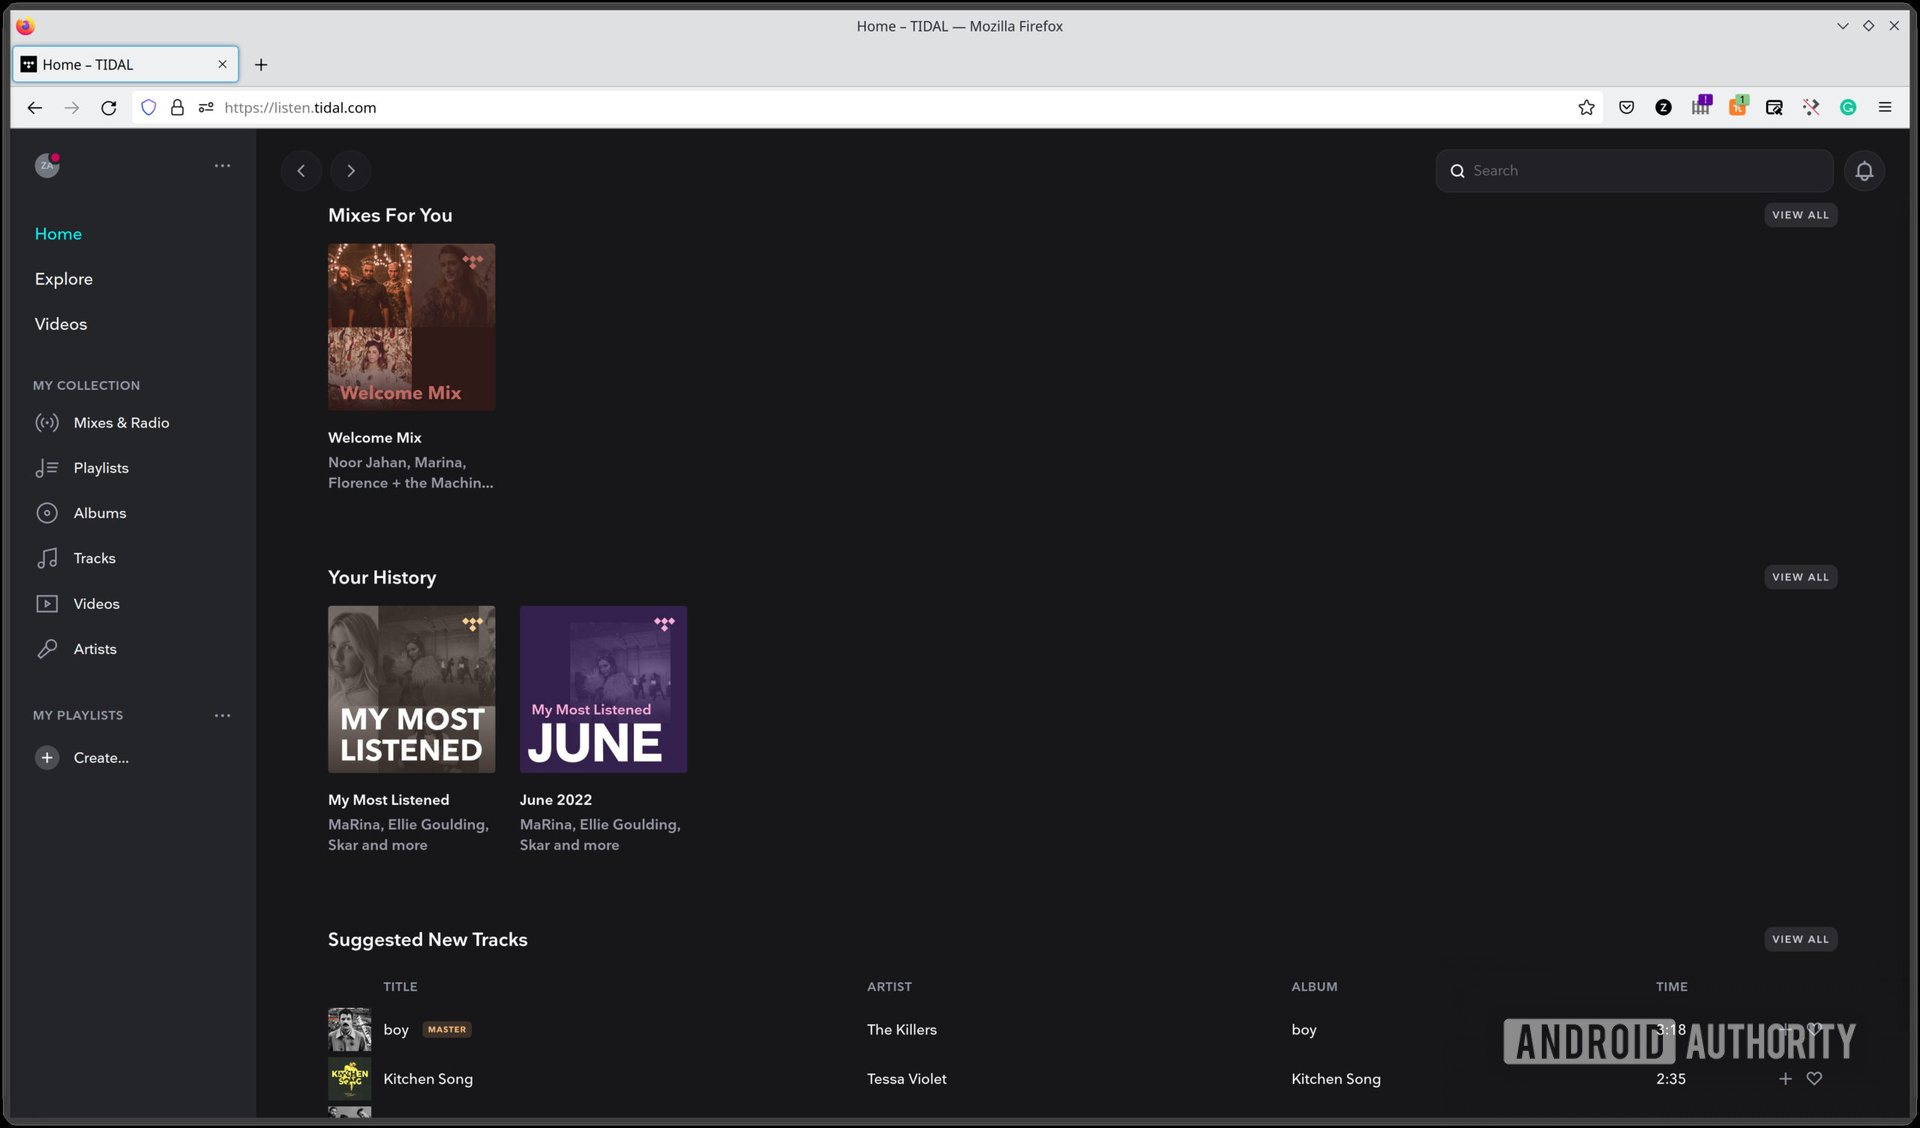 A screenshot of the TIDAL home page on the web player.